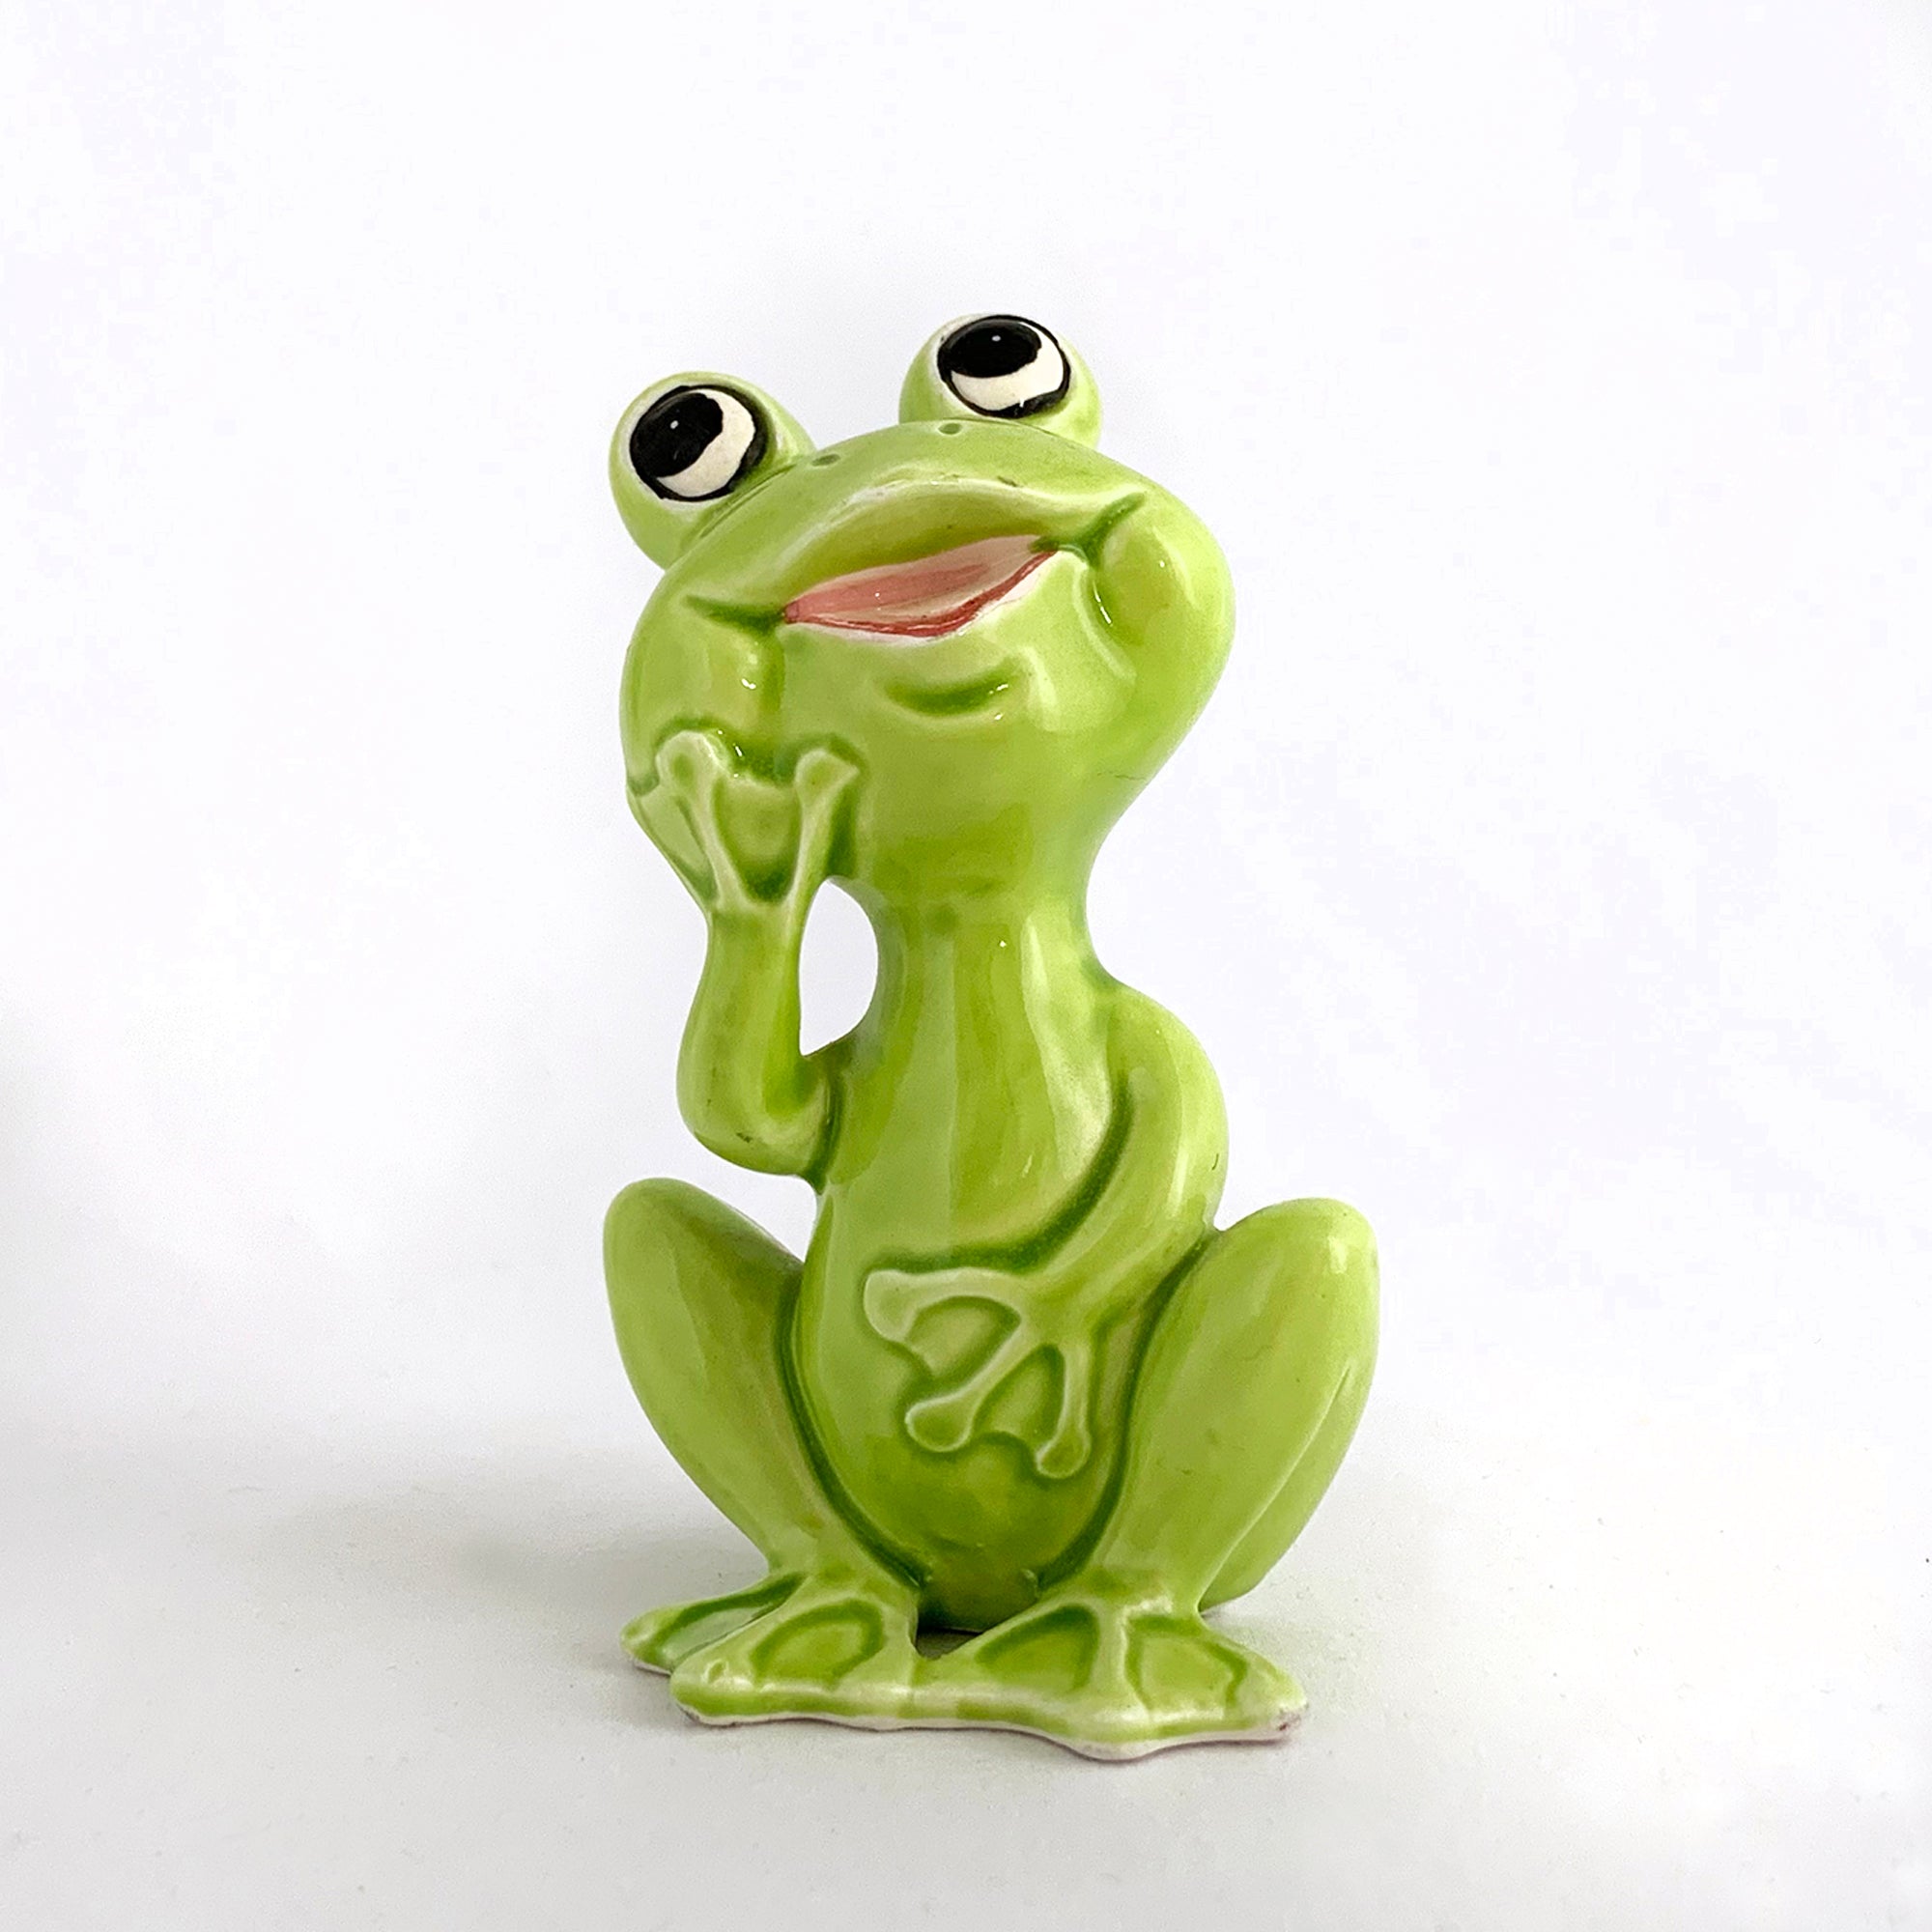 Vintage Mid-Century Ceramic Lime Green Smiling Seated Frog Figurine, N –  Jack's Daughter of All Trades